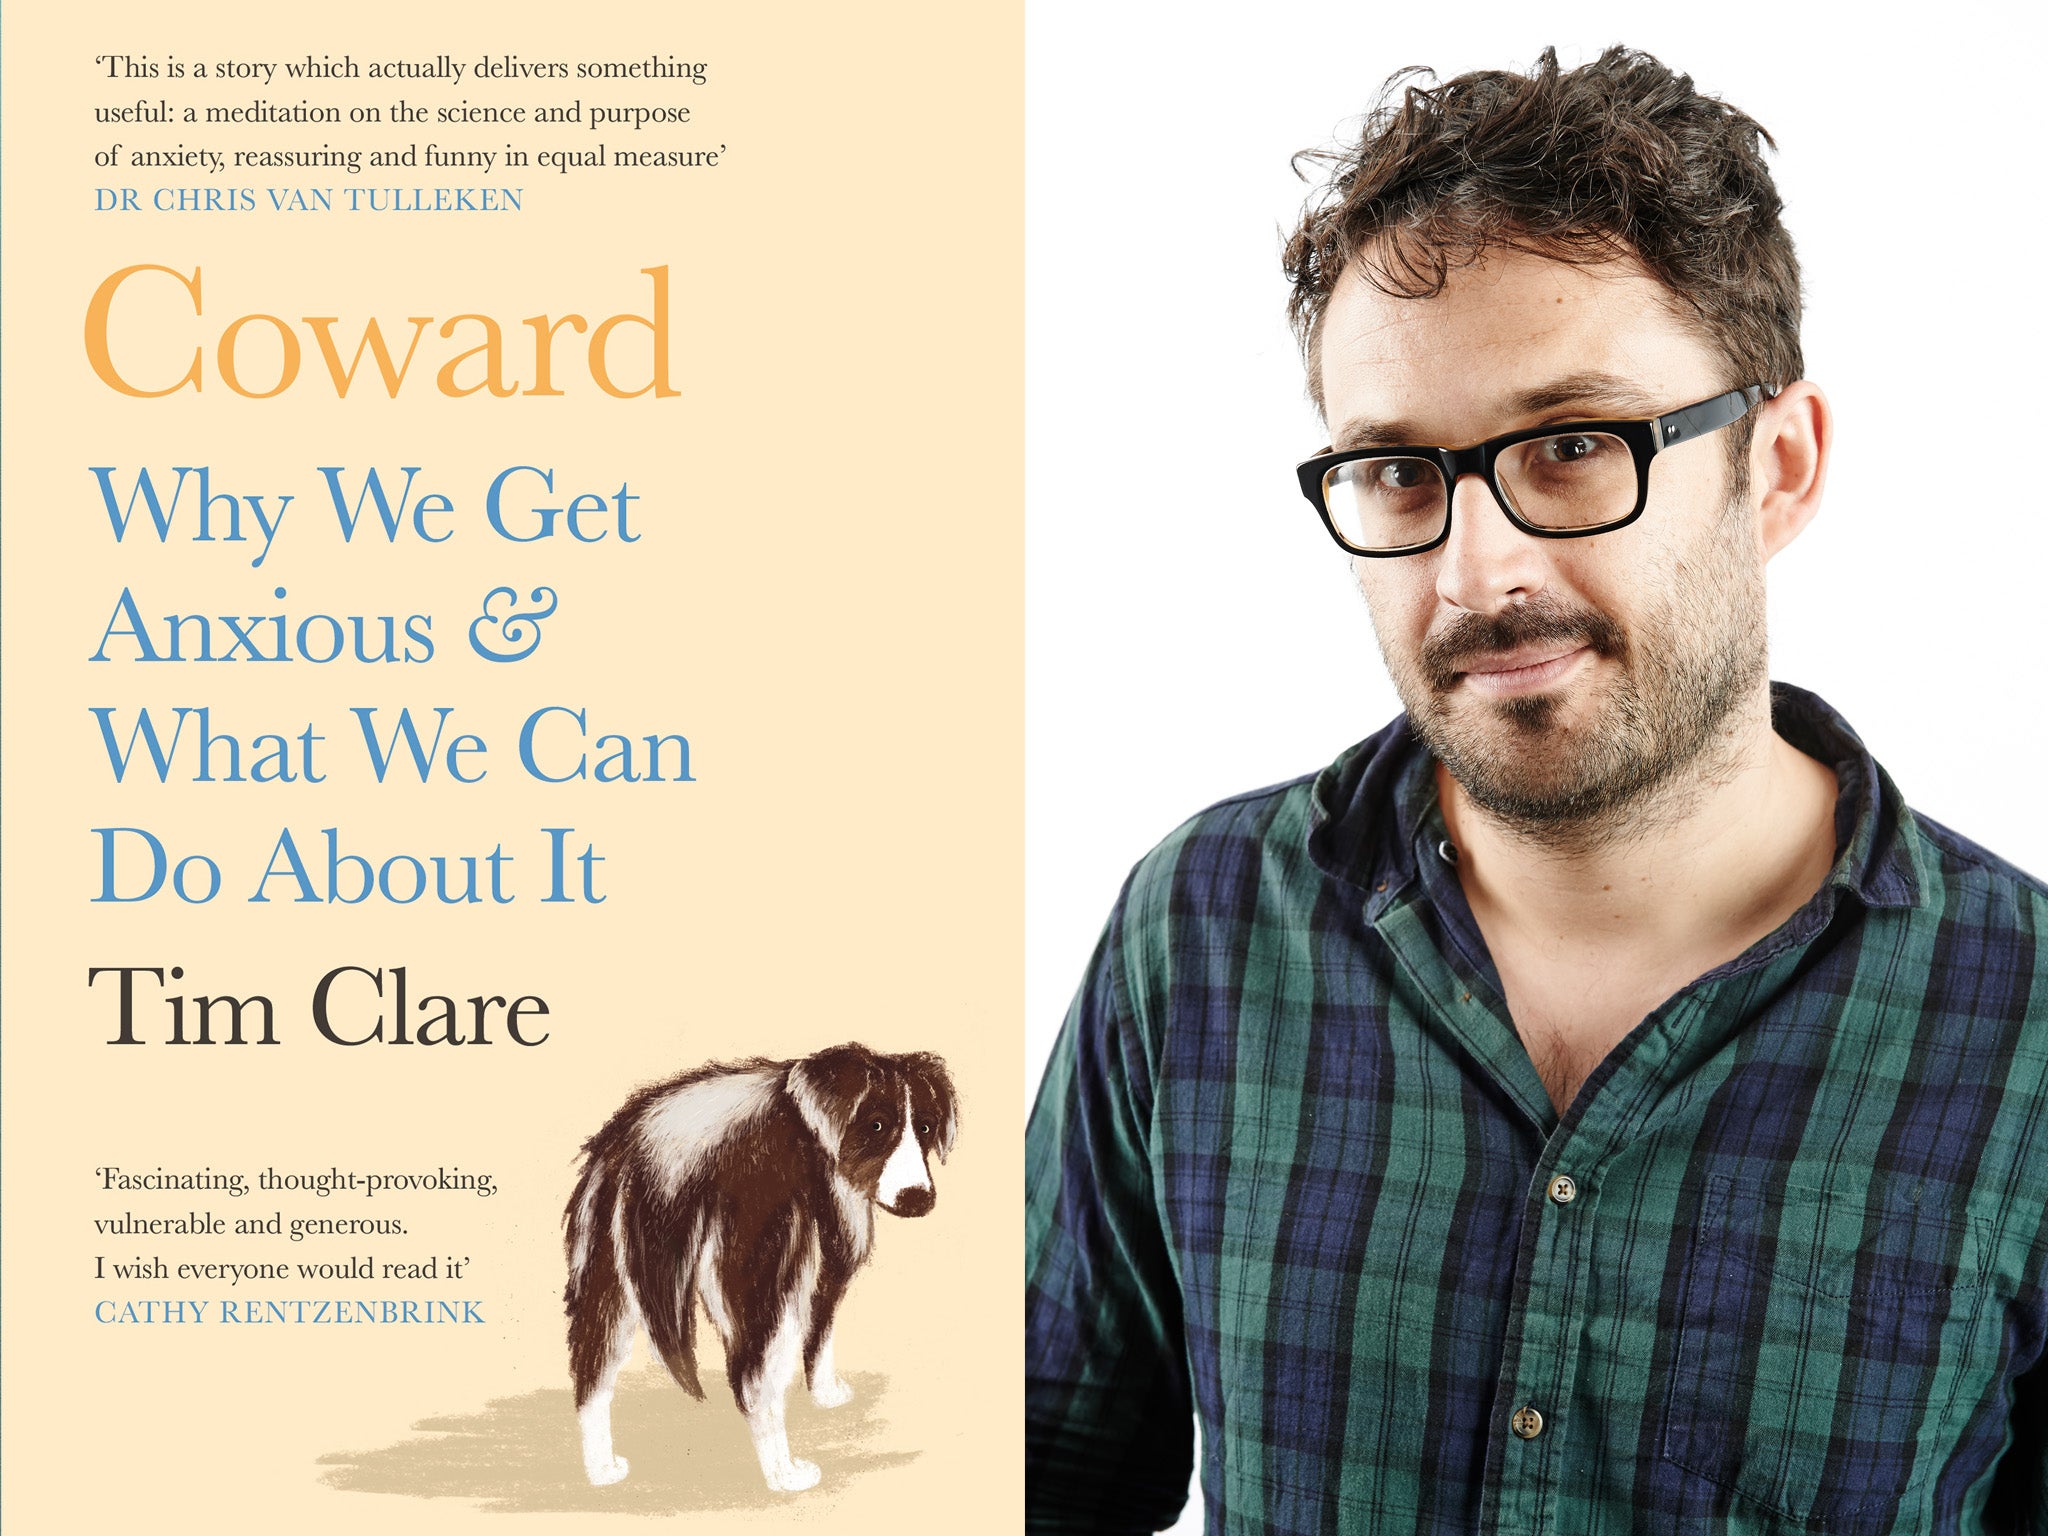 Tim Clare’s ‘Coward: Why We Get Anxious & What We Can Do About It’ is a clever blend of memoir, science and useful advice